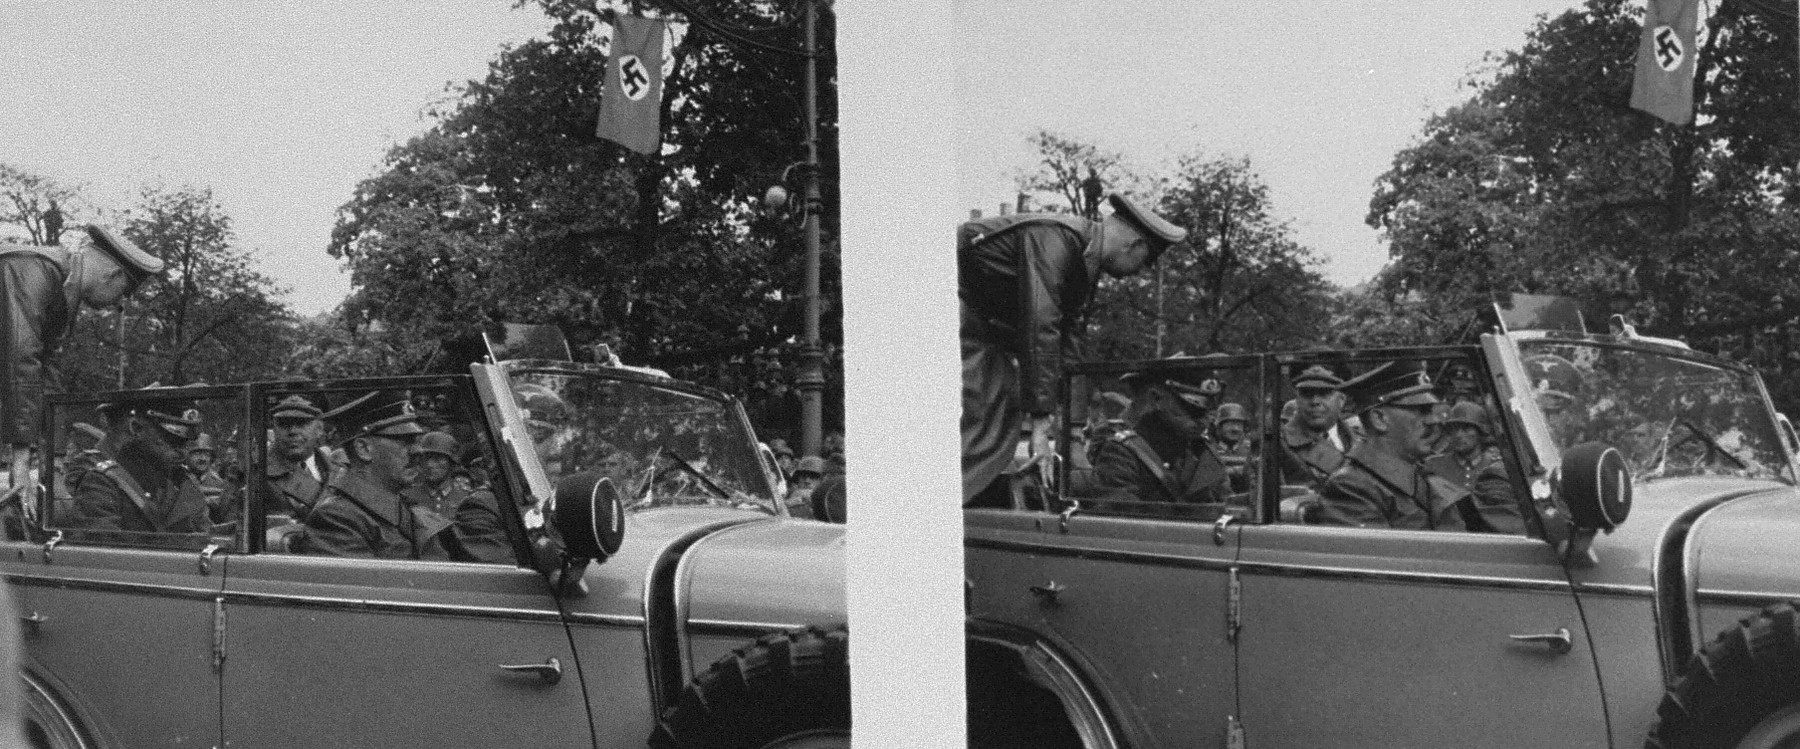 Stereoscopic photograph of Adolf Hitler and other officials leaving the viewing stand following a victory parade in Warsaw celebrating the German conquest of Poland